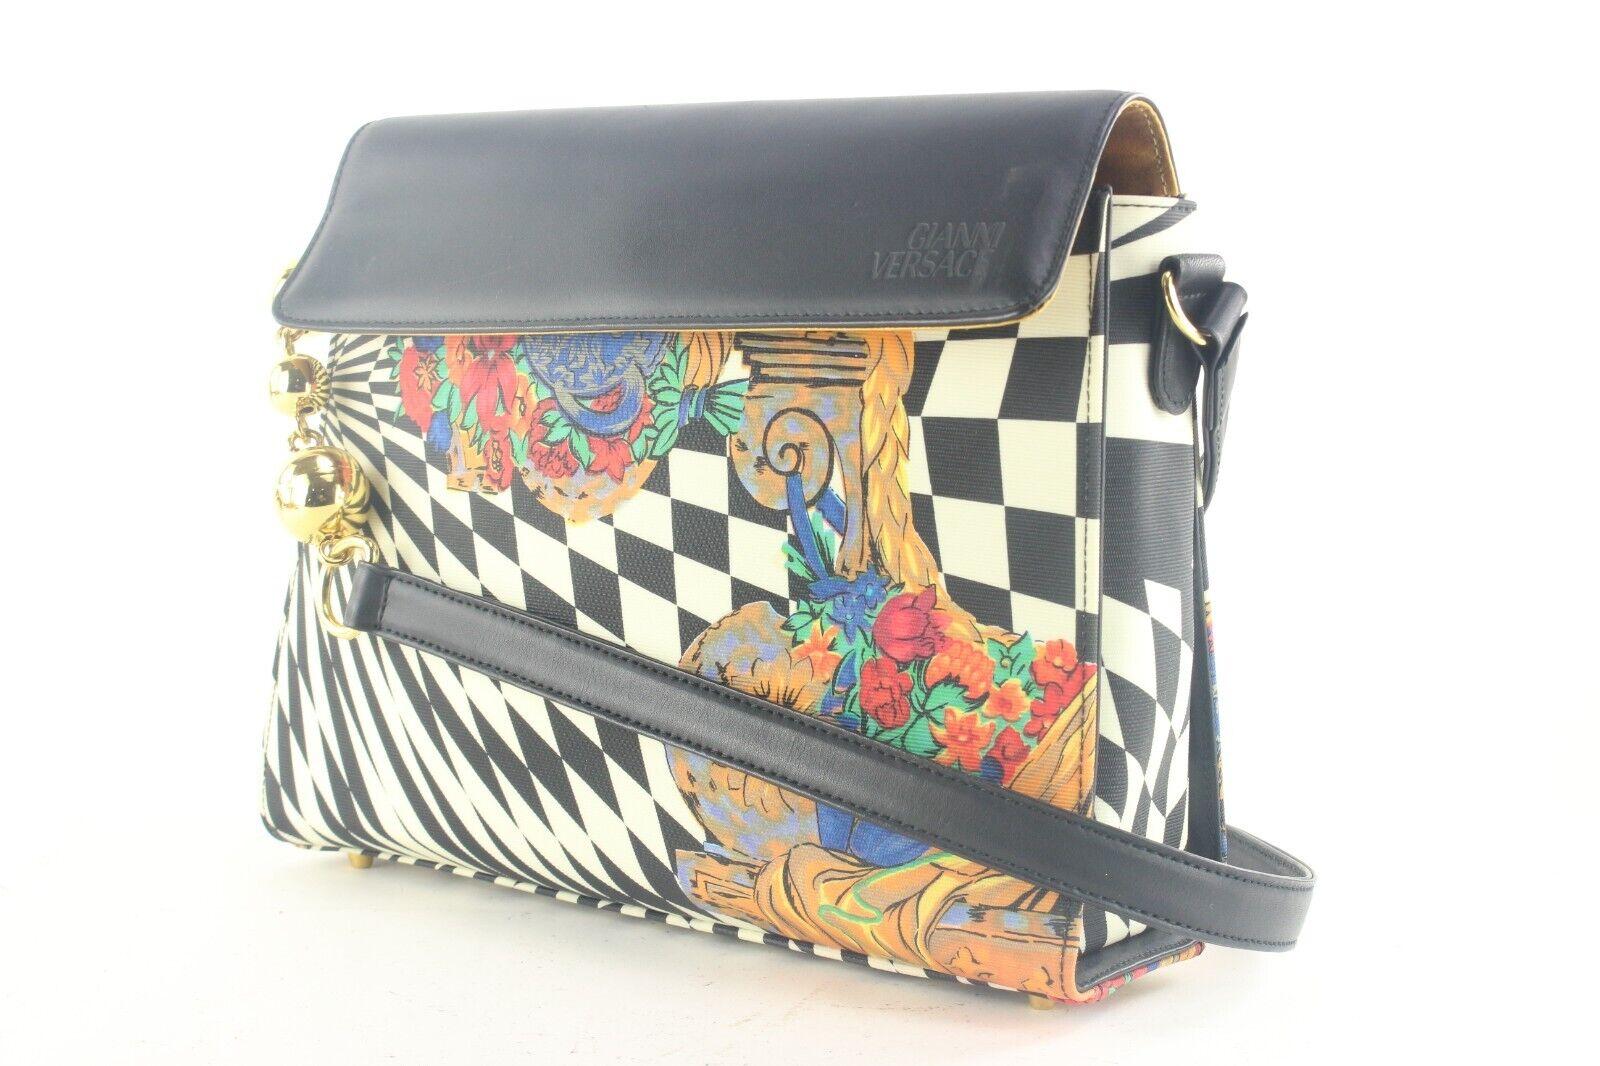 Gianni Versace Rare Psychedelic Illusion Crossbody 1GV912K For Sale 7